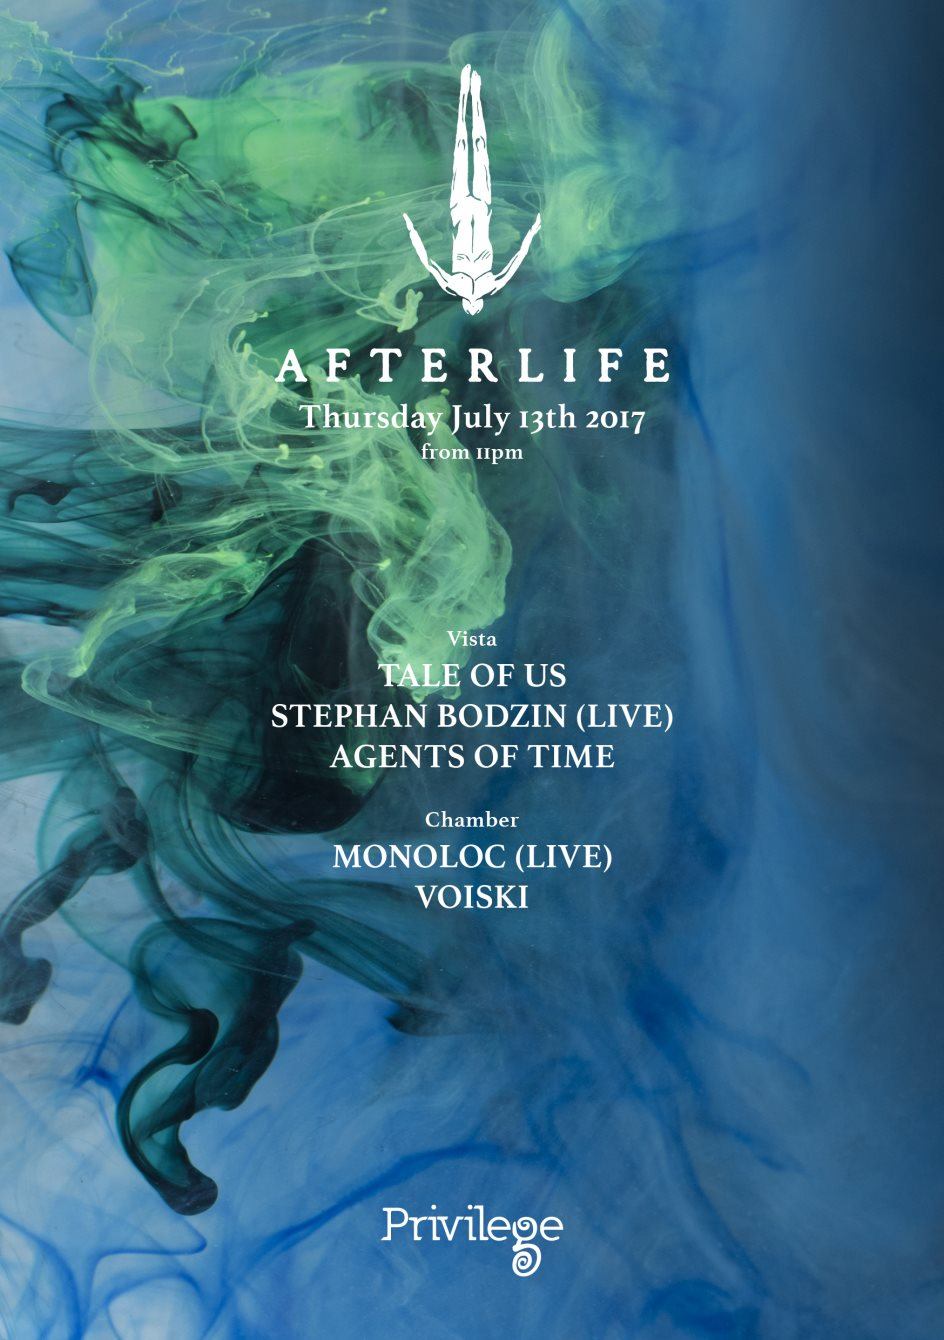 Afterlife with Tale of Us: Zamna Music's first confirmation